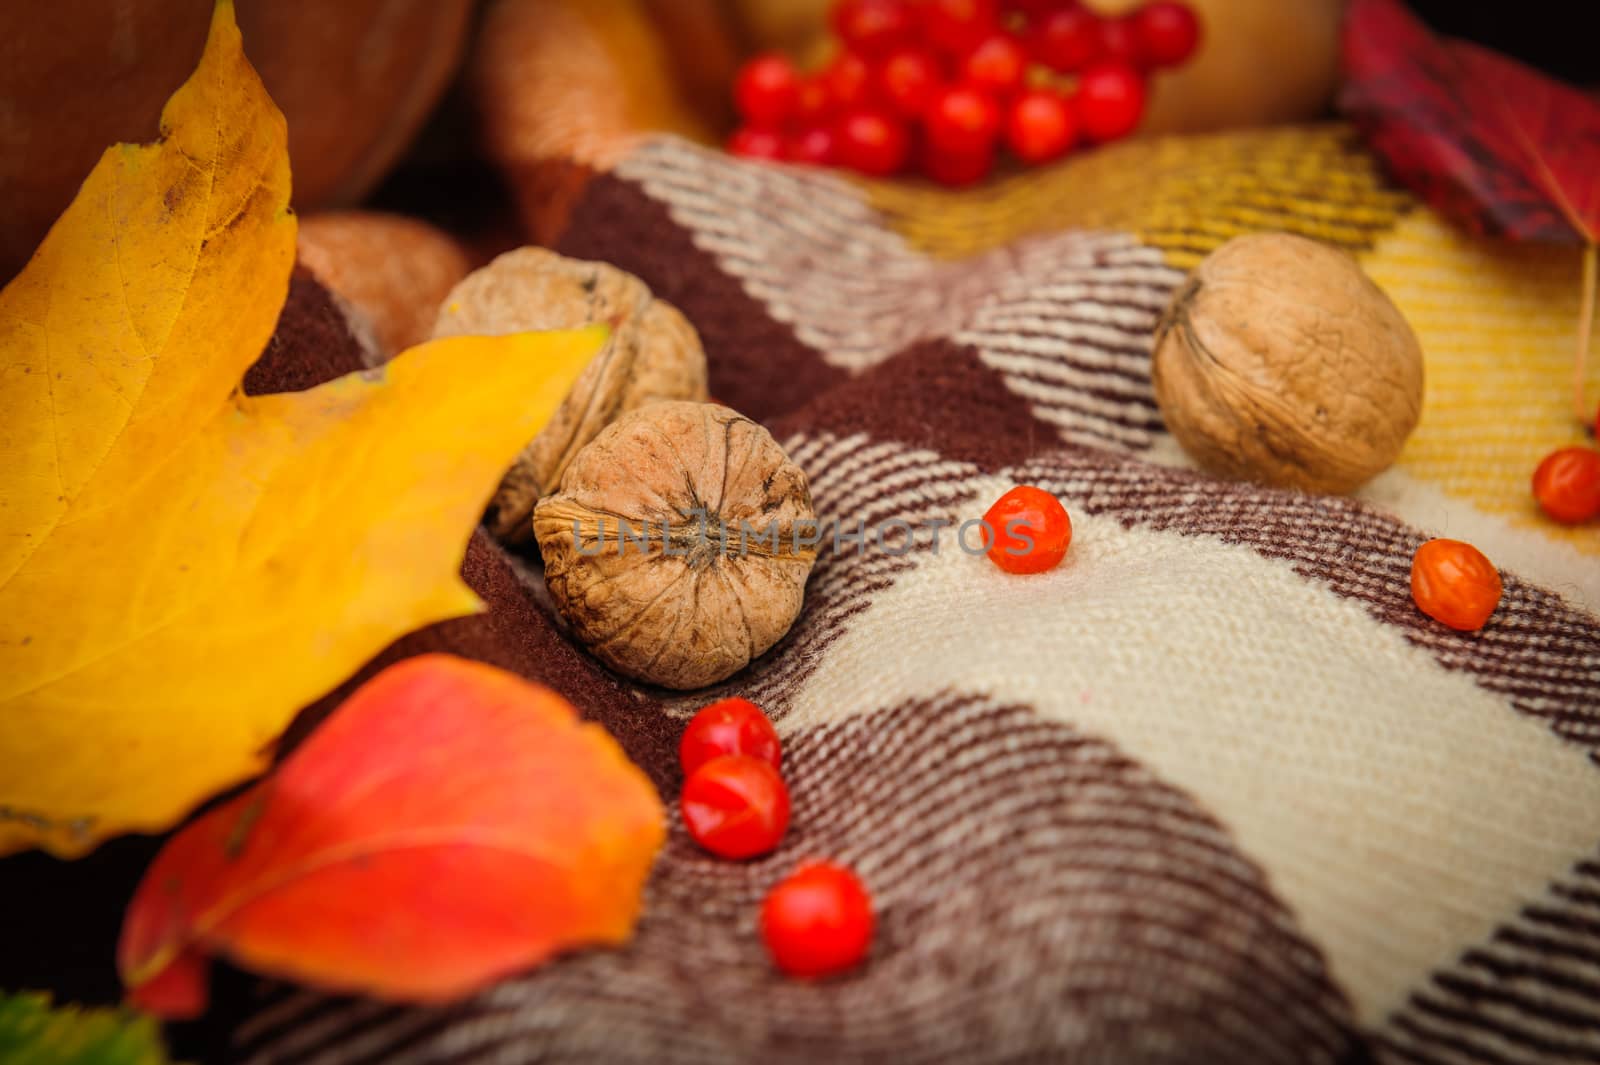 Romantic autumn still life with walnuts, berries and leaves on plaid, selective focus